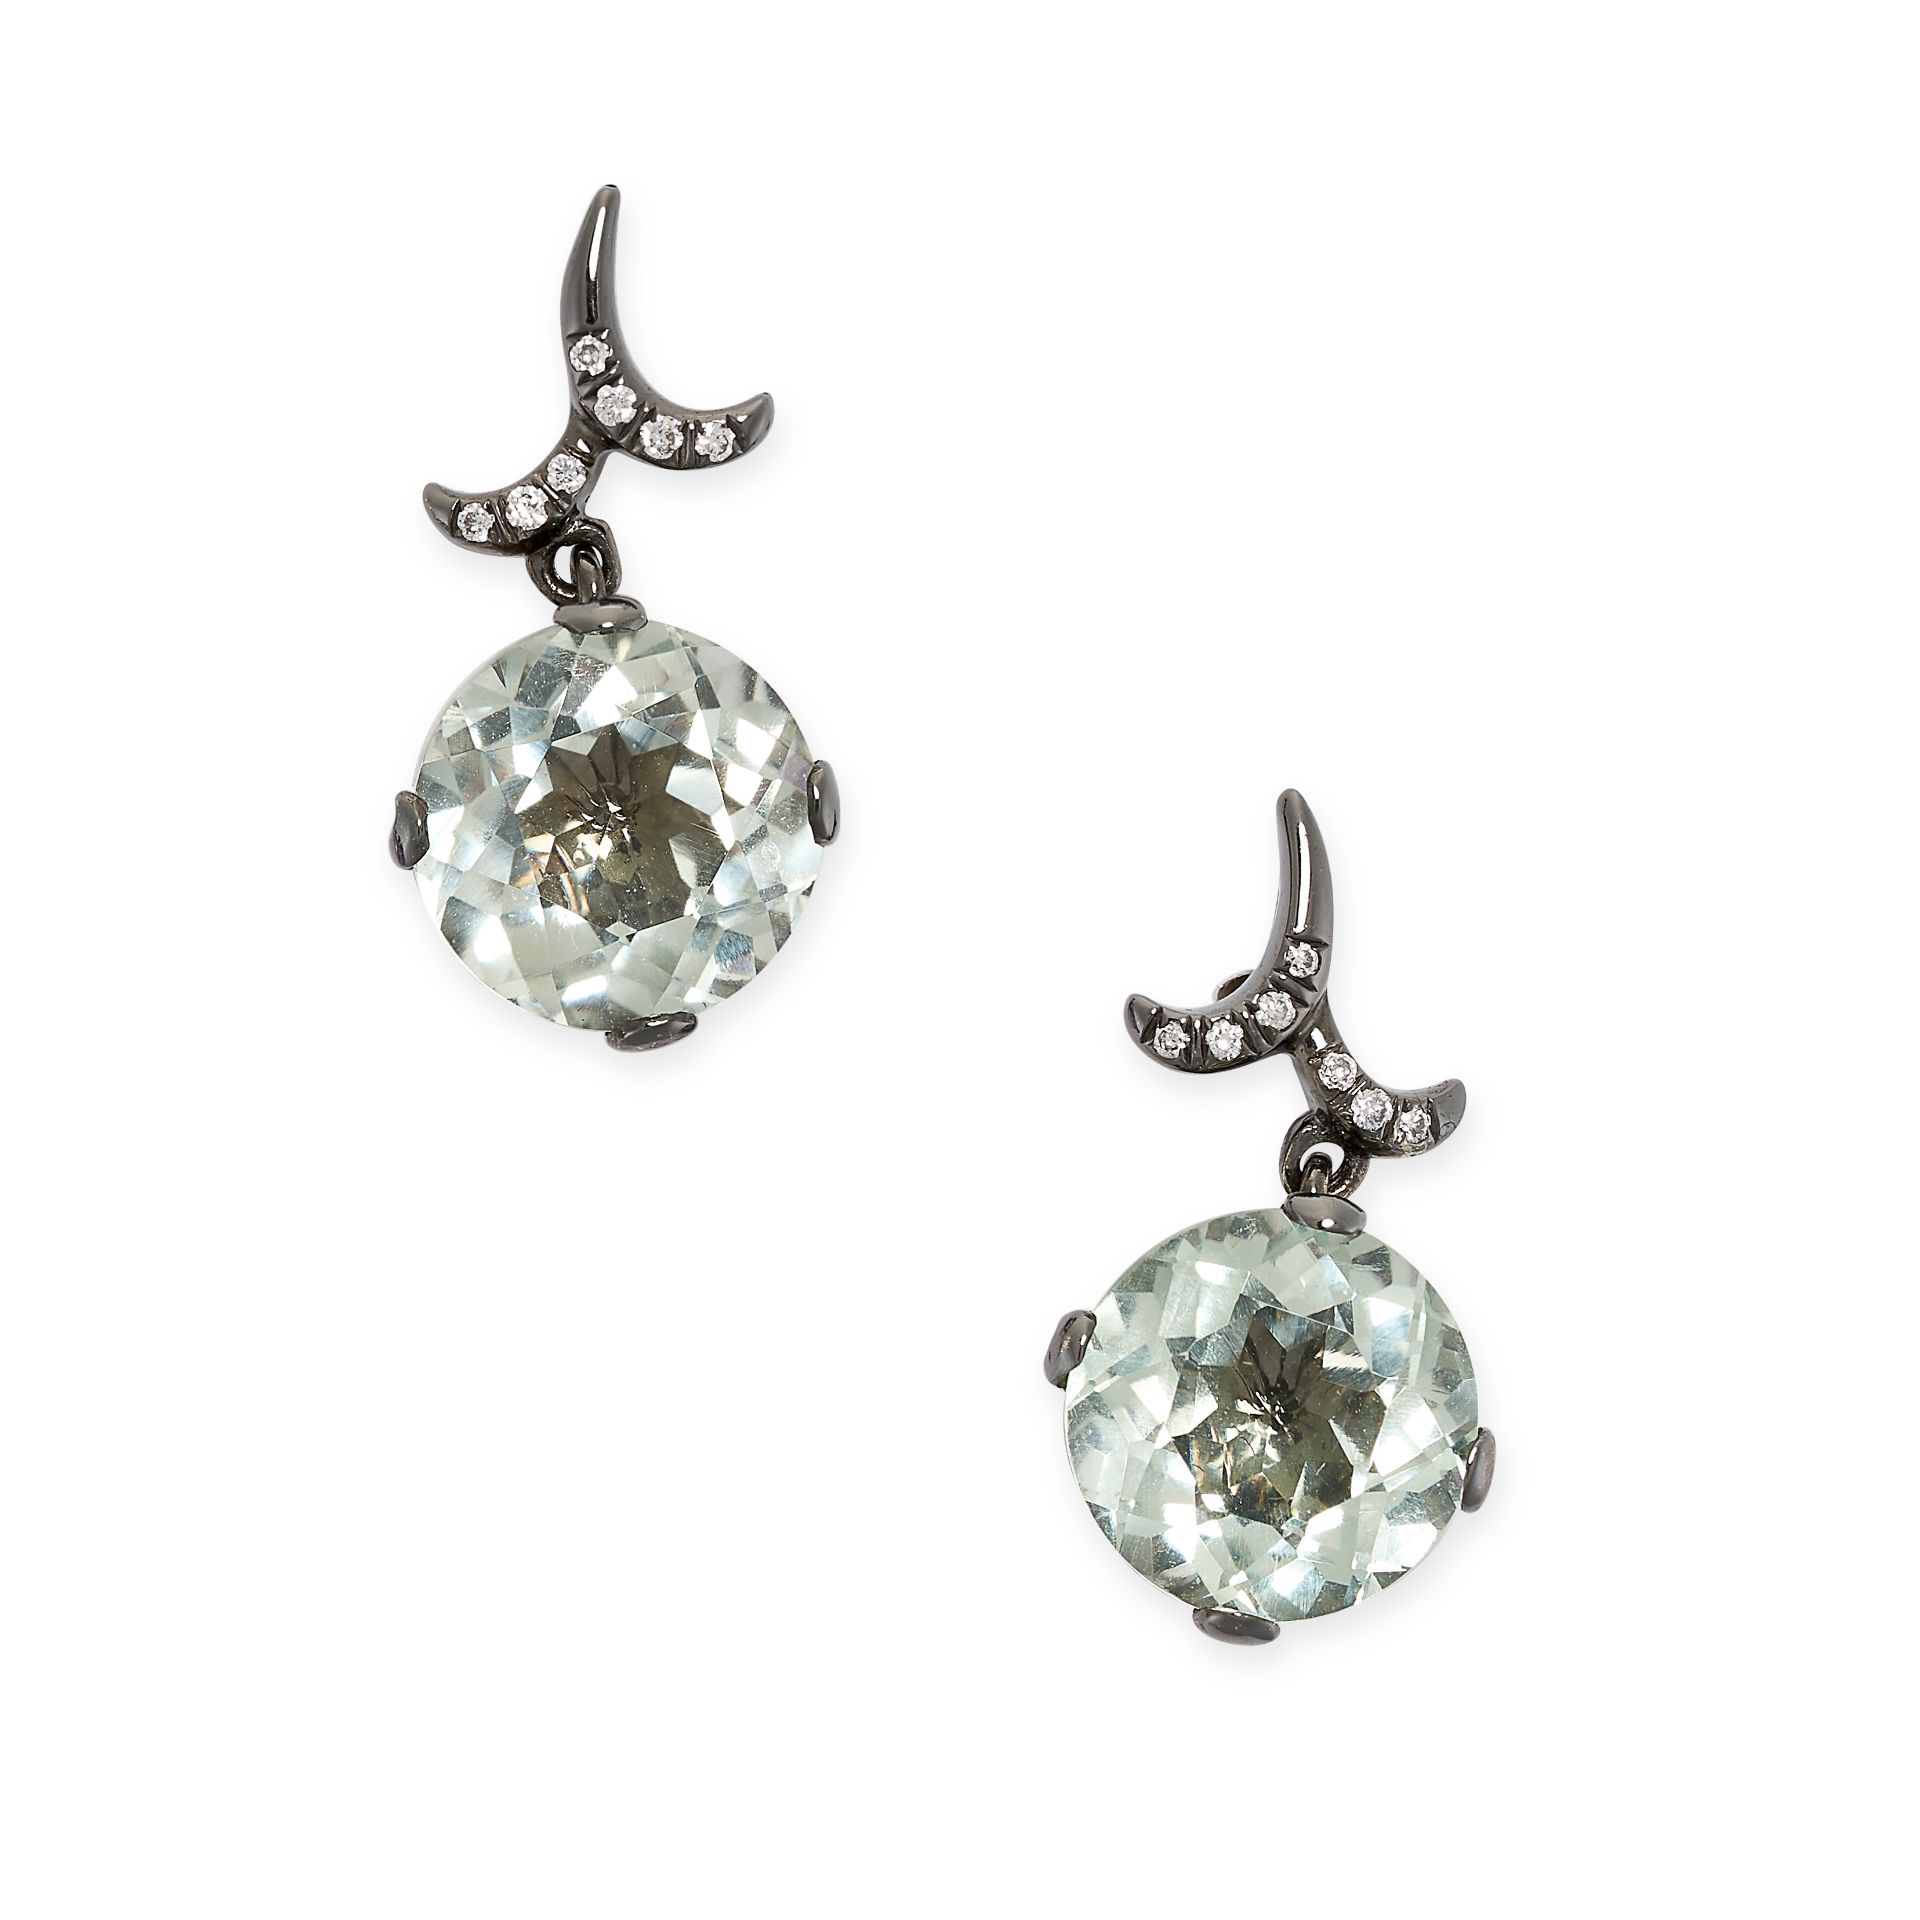 A PAIR OF PRASIOLITE EARRINGS each comprising a scrolling design set with round brilliant diamonds